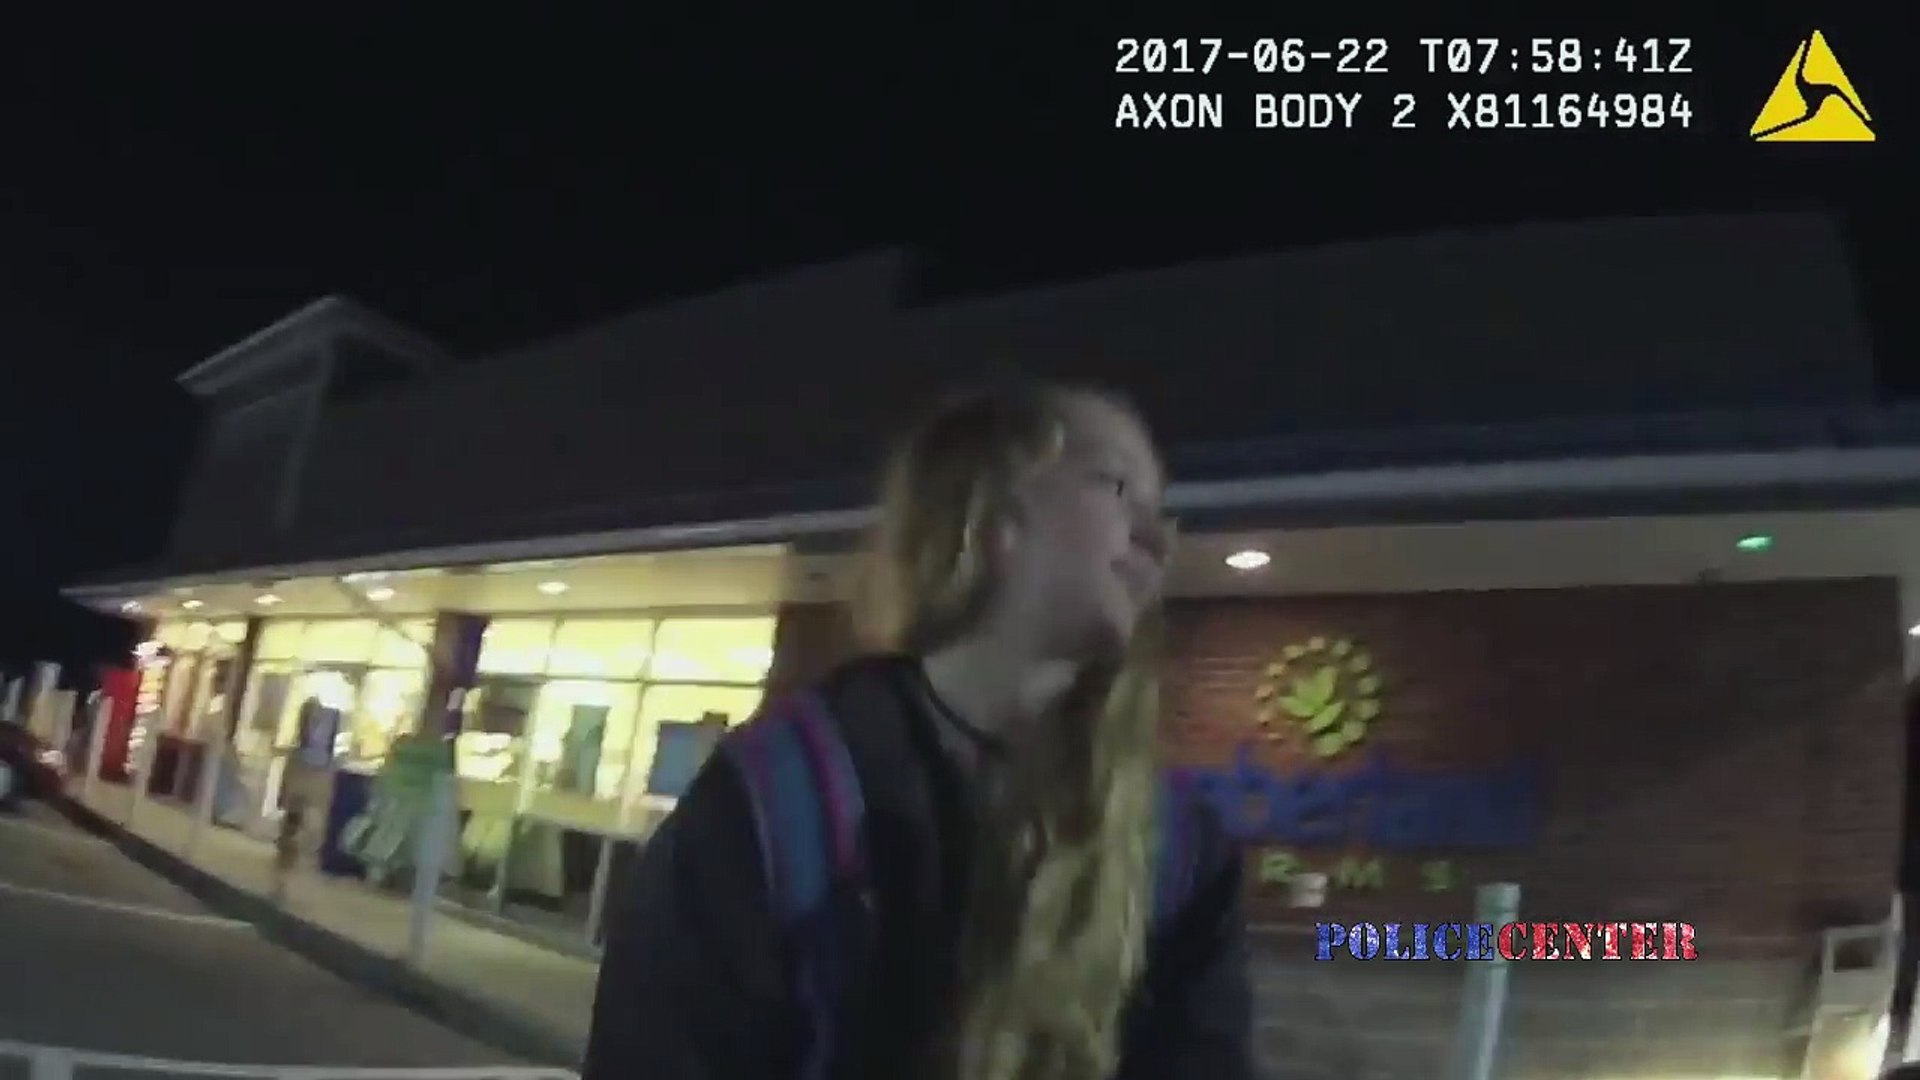 ENTITLED MILLENNIAL TRIES TO WEASEL OUT OF MINOR WEED TICKET BY CRYING ‘SEXUAL ASSAULT’